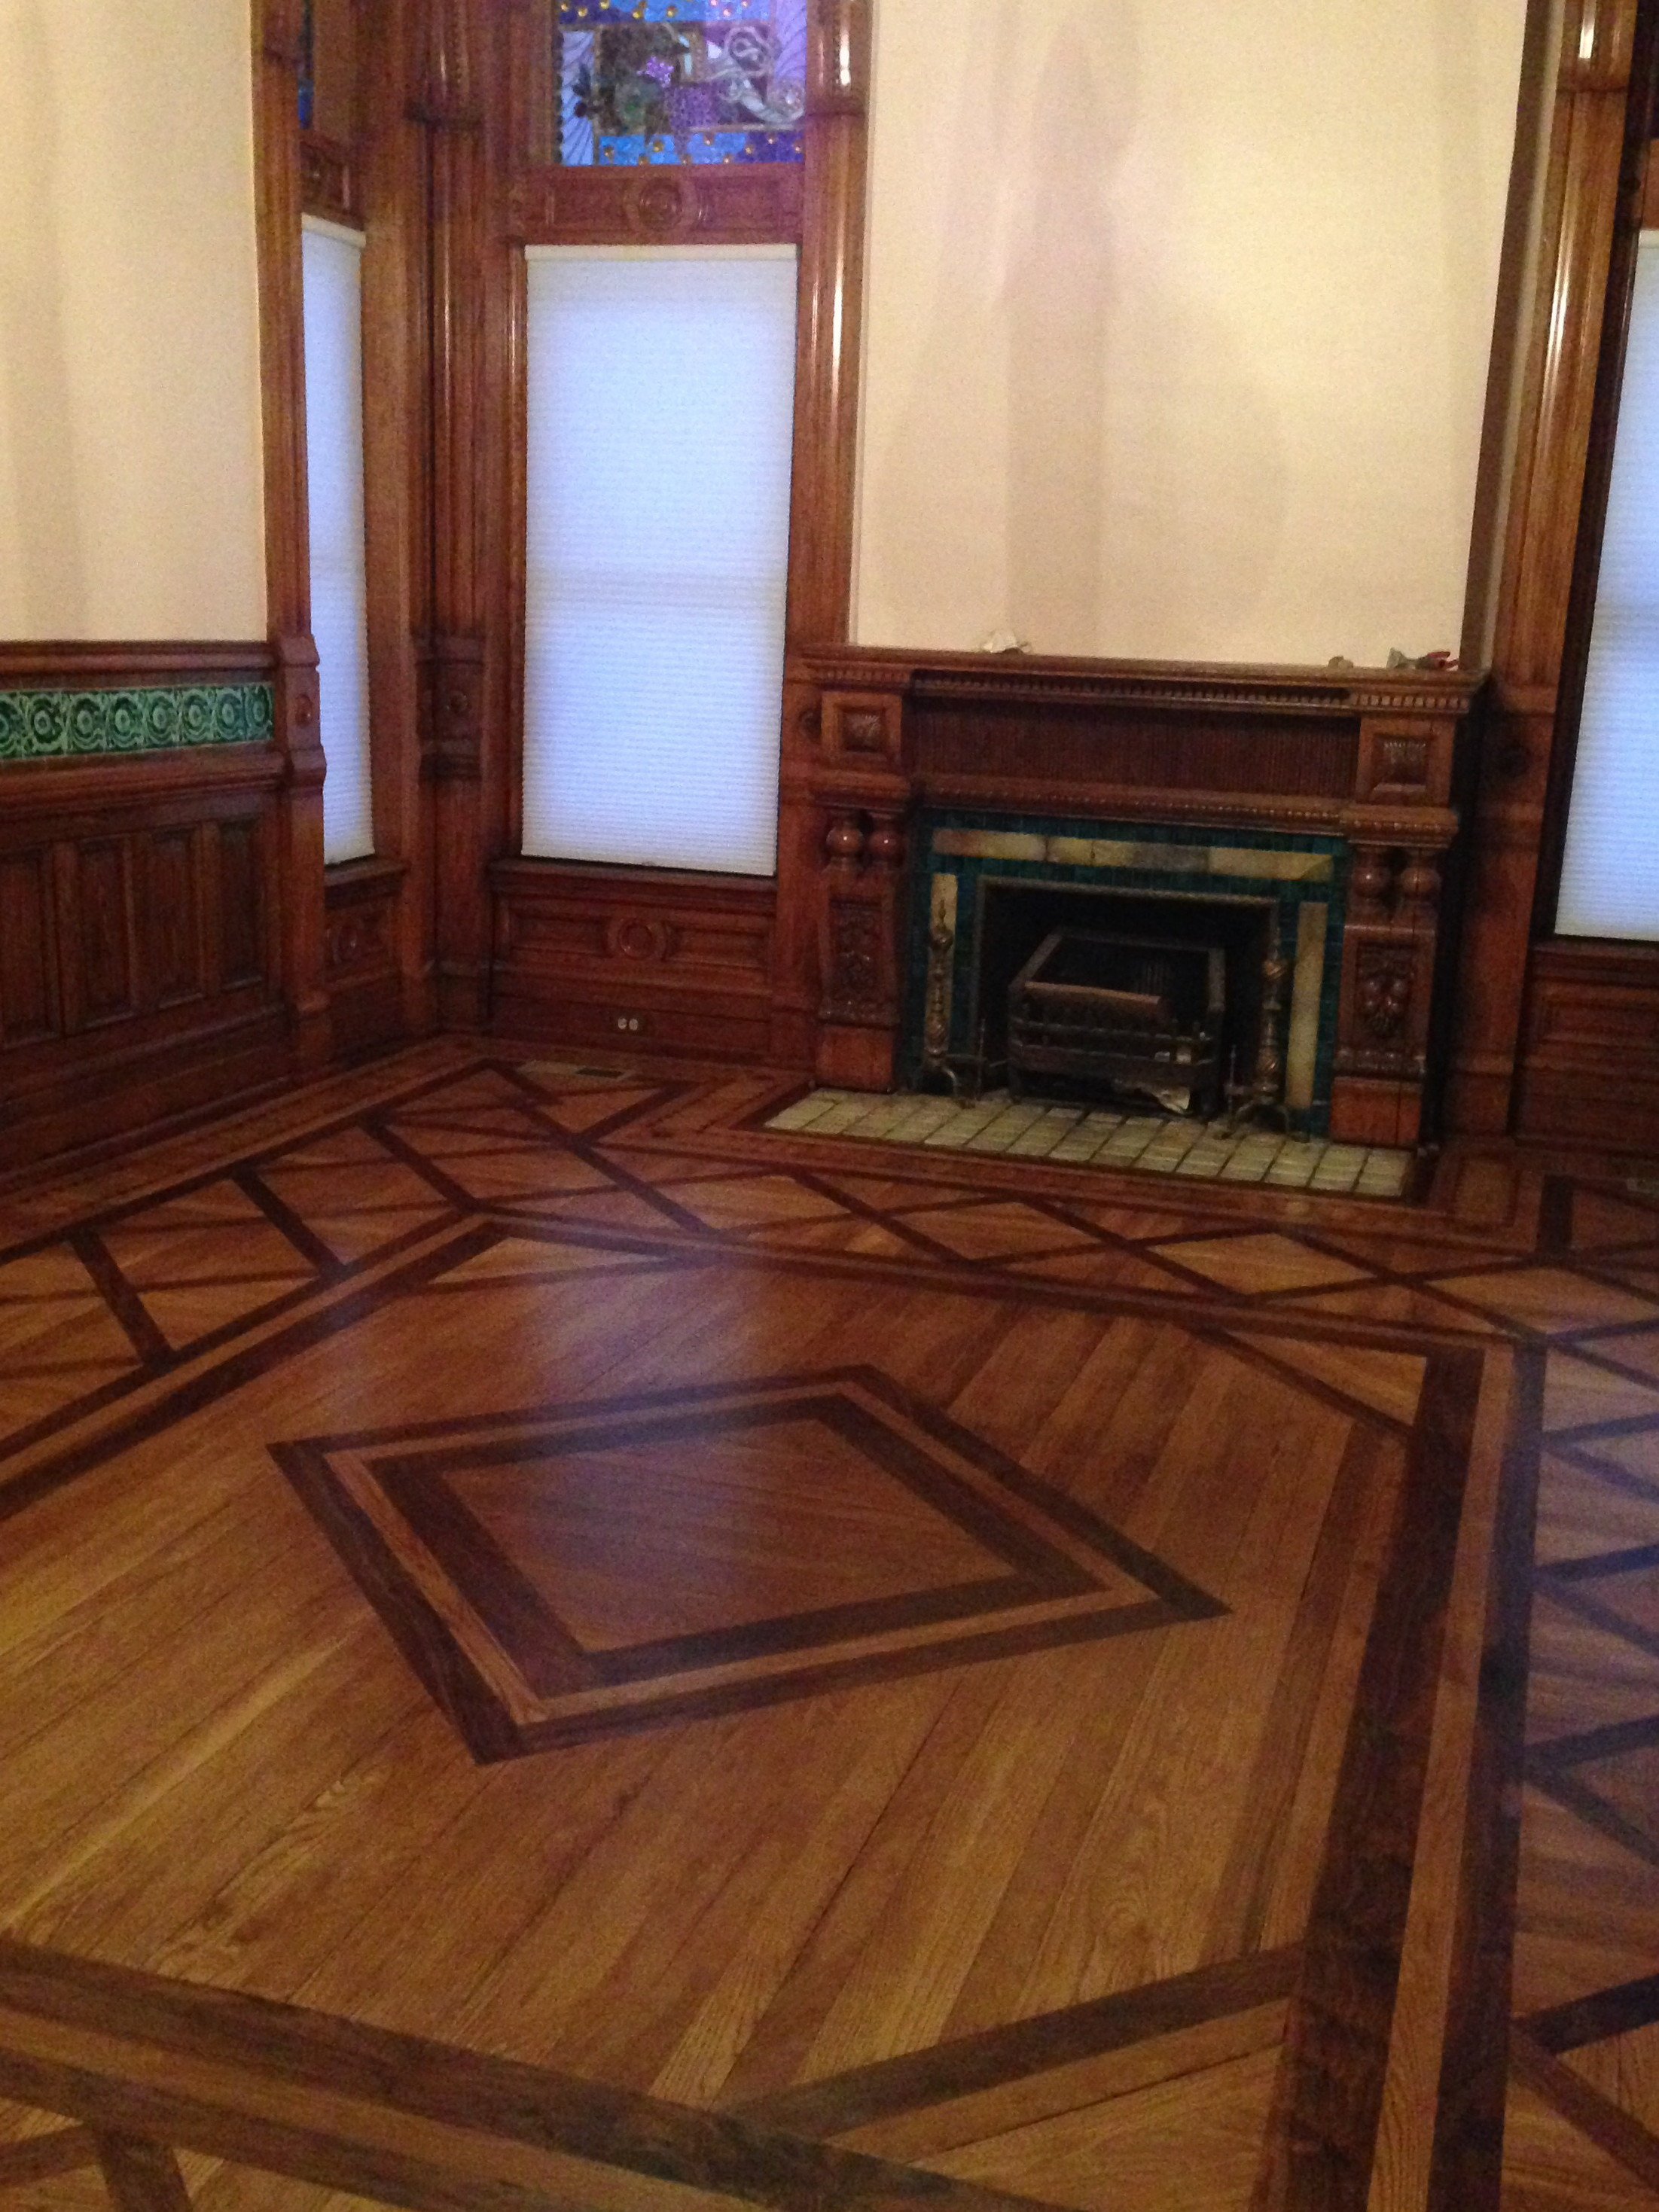 hardwood floor repair franklin tn of explore the shakespeare chateau inn and gardens pertaining to here shown at left the faithful reproduction of the parquet floor in the dining room the original floor suffered irreparable water damage during and